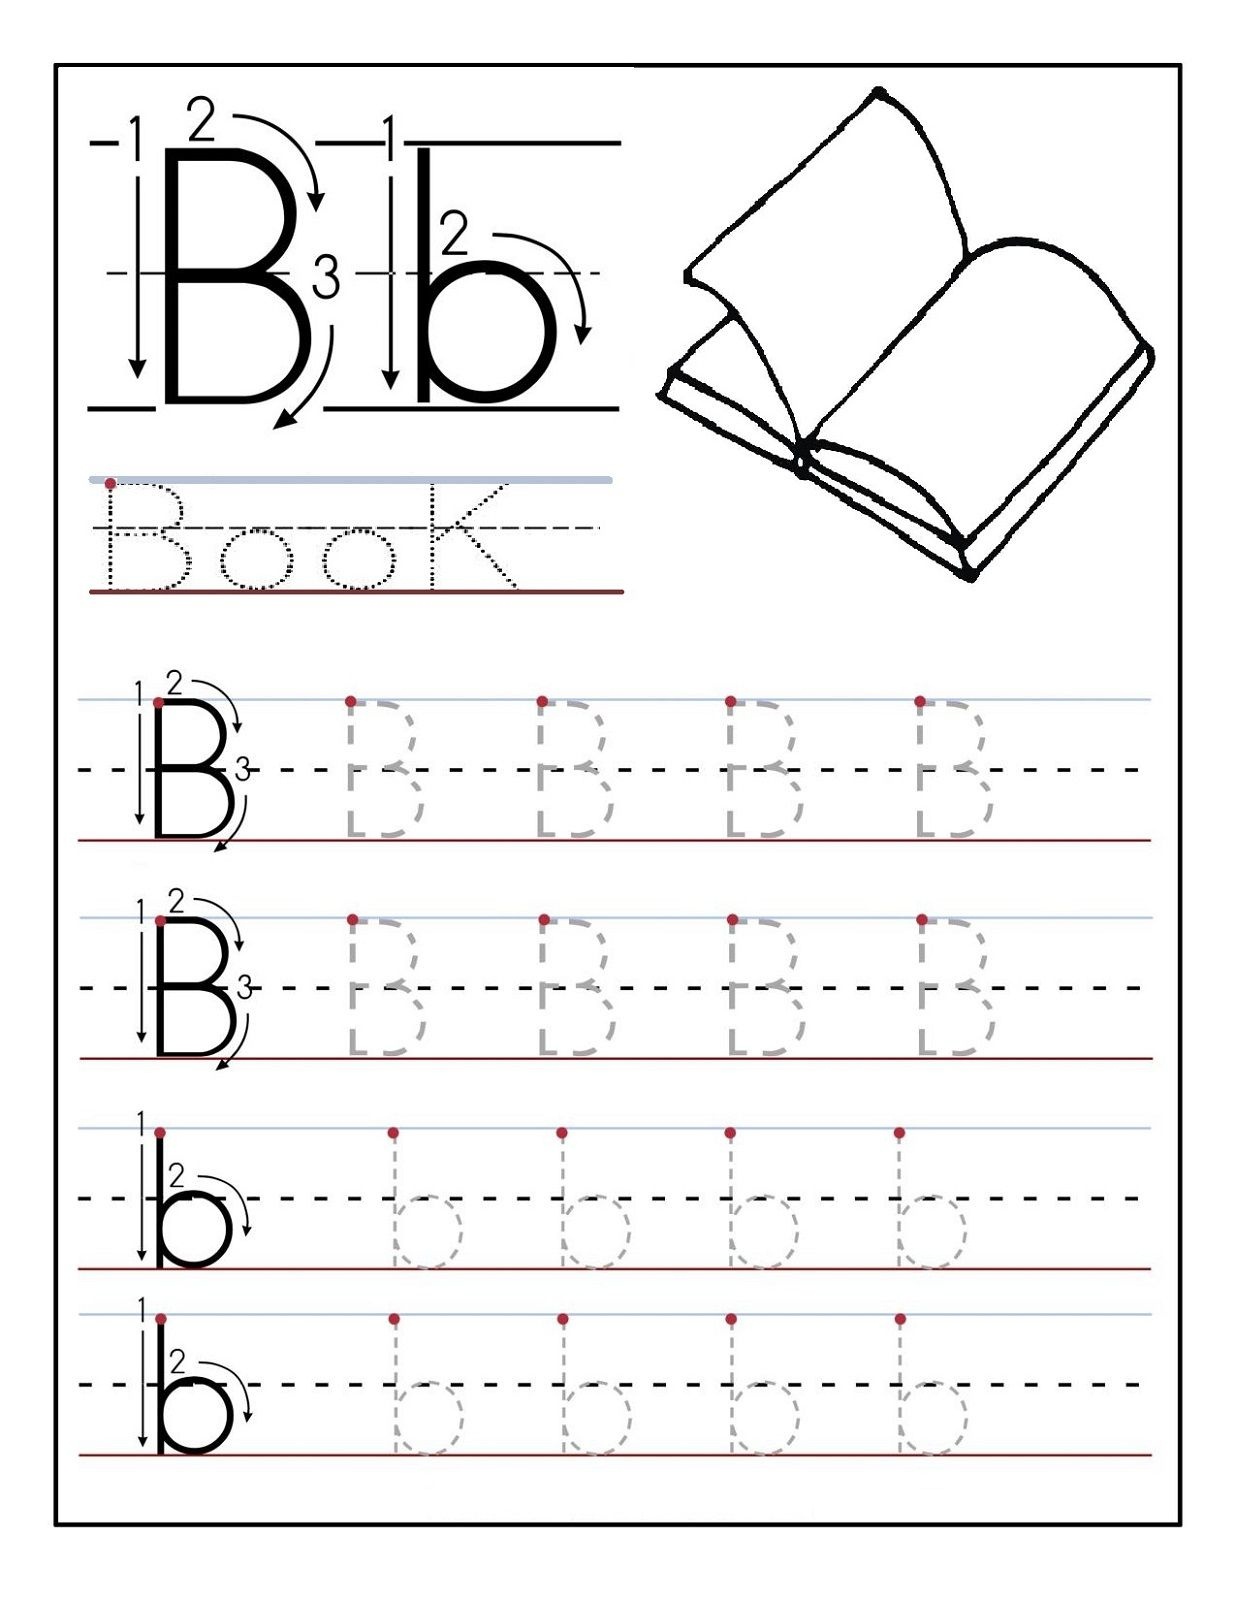 Traceable Letters Worksheet For Children Golden Age Activities - Free Printable Traceable Letters